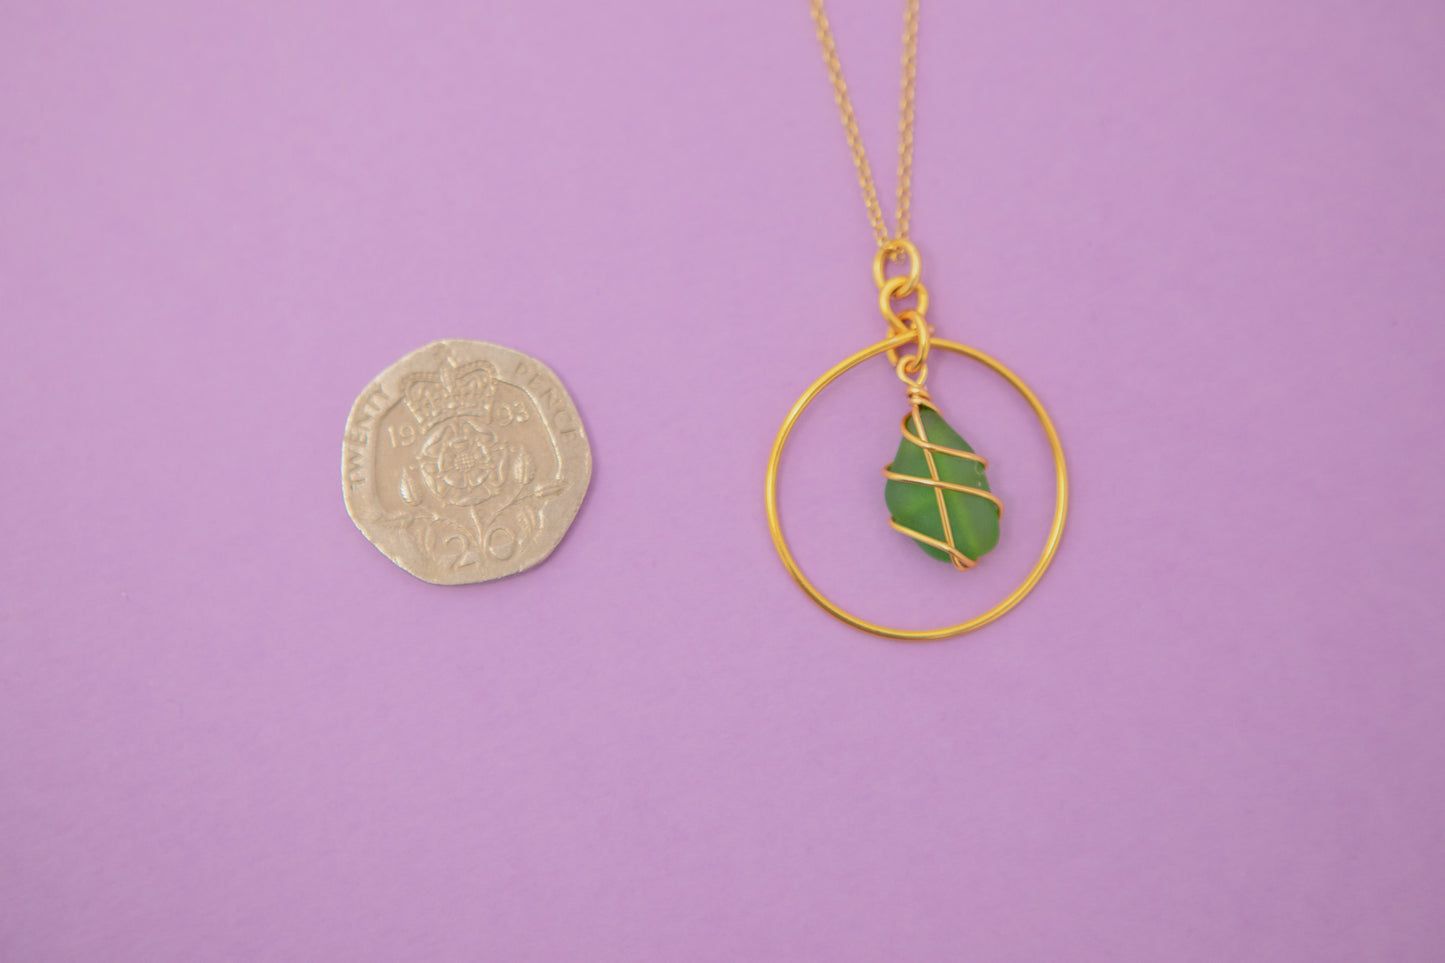 Jennie Hoop Necklace in Gold & Bright Green